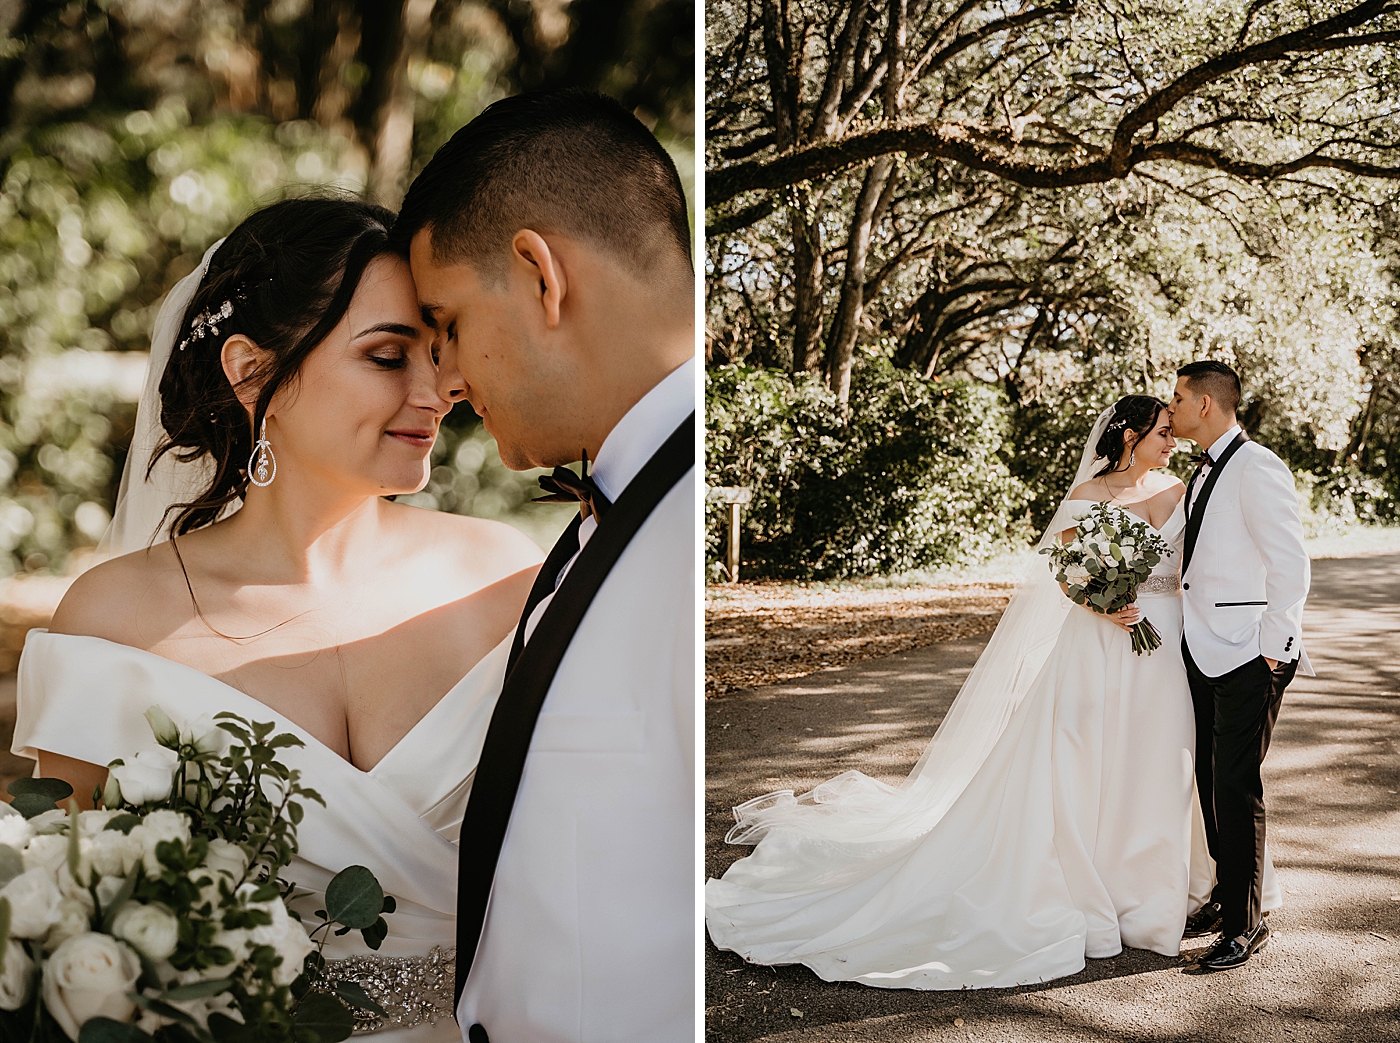 Bride and Groom nuzzling Lavan Venue Wedding Photography captured by South Florida Wedding Photographer Krystal Capone Photography